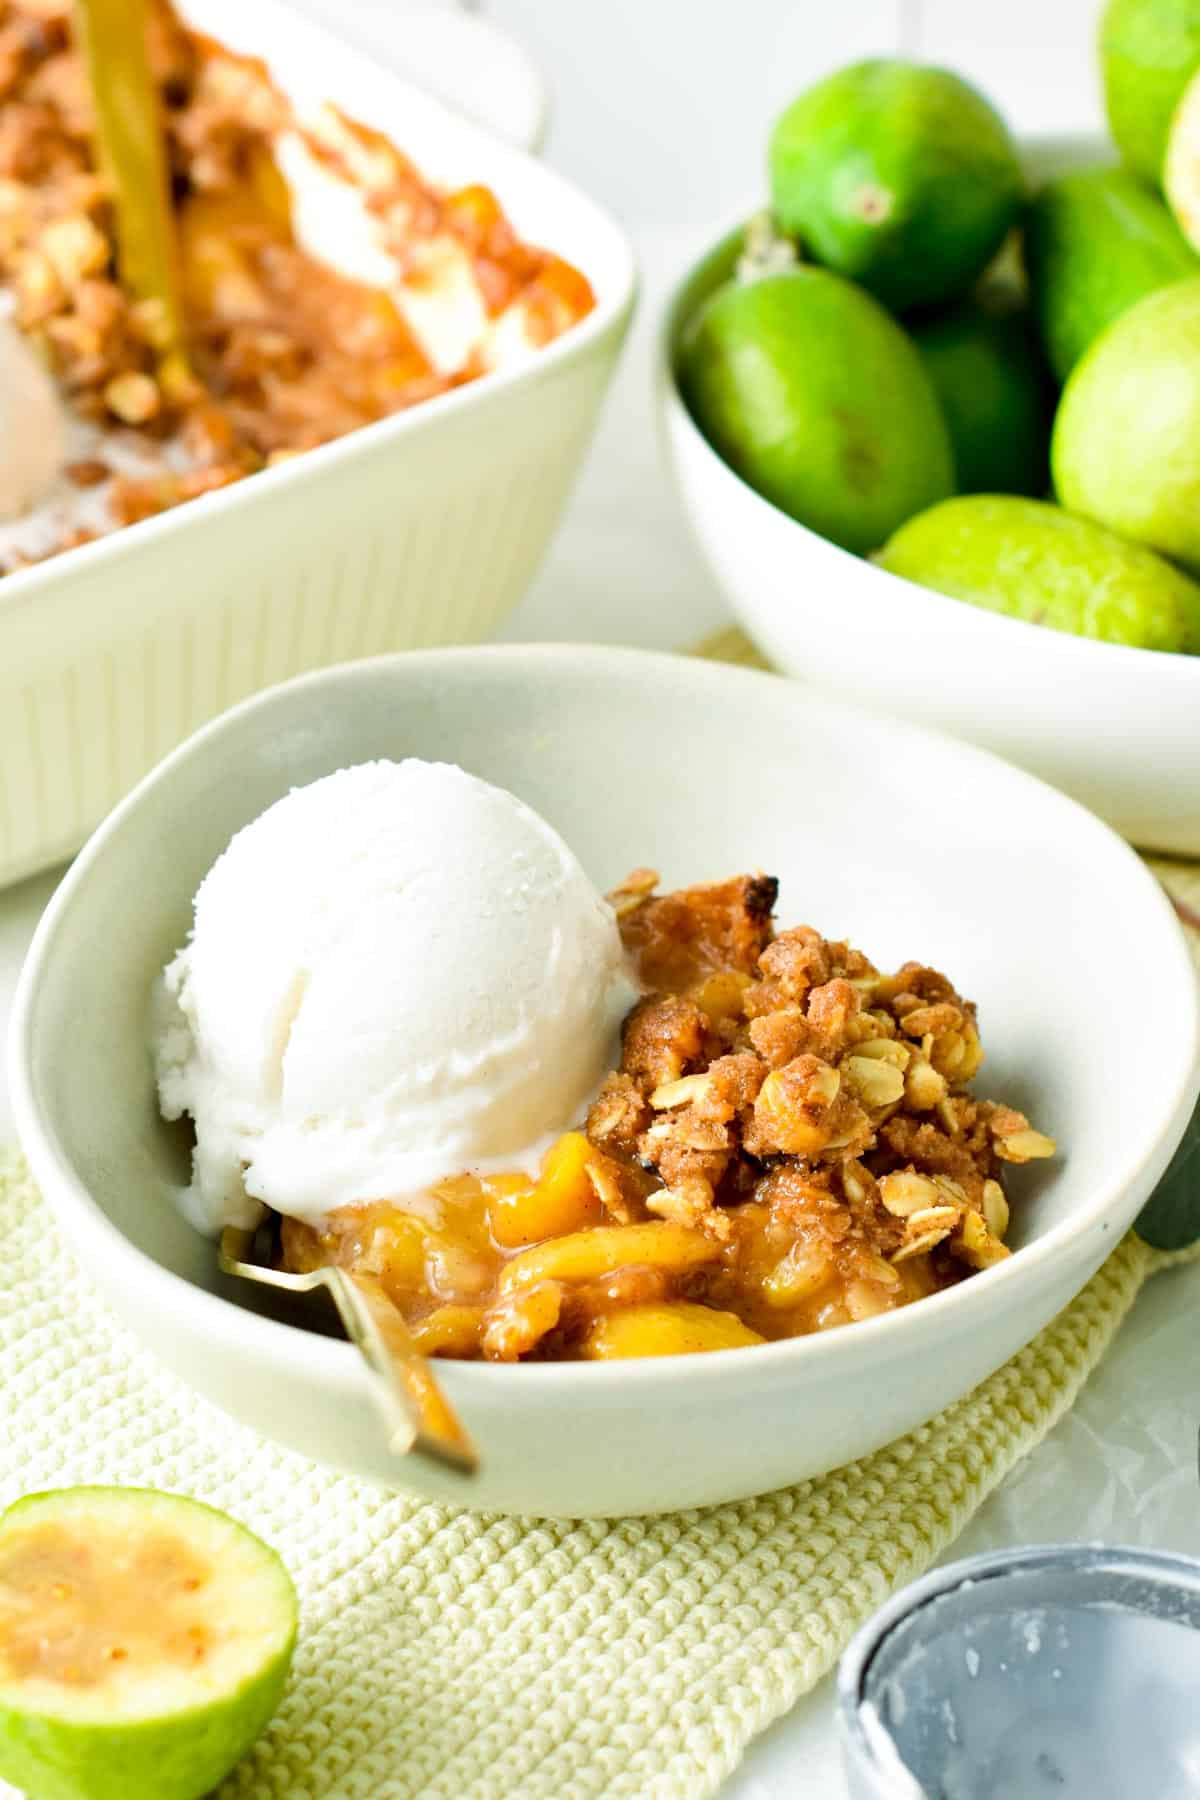 An easy Feijoa Crumble perfect to use all your Feijoa fruits this Autumn and serve as a delicious dessert to all the family.